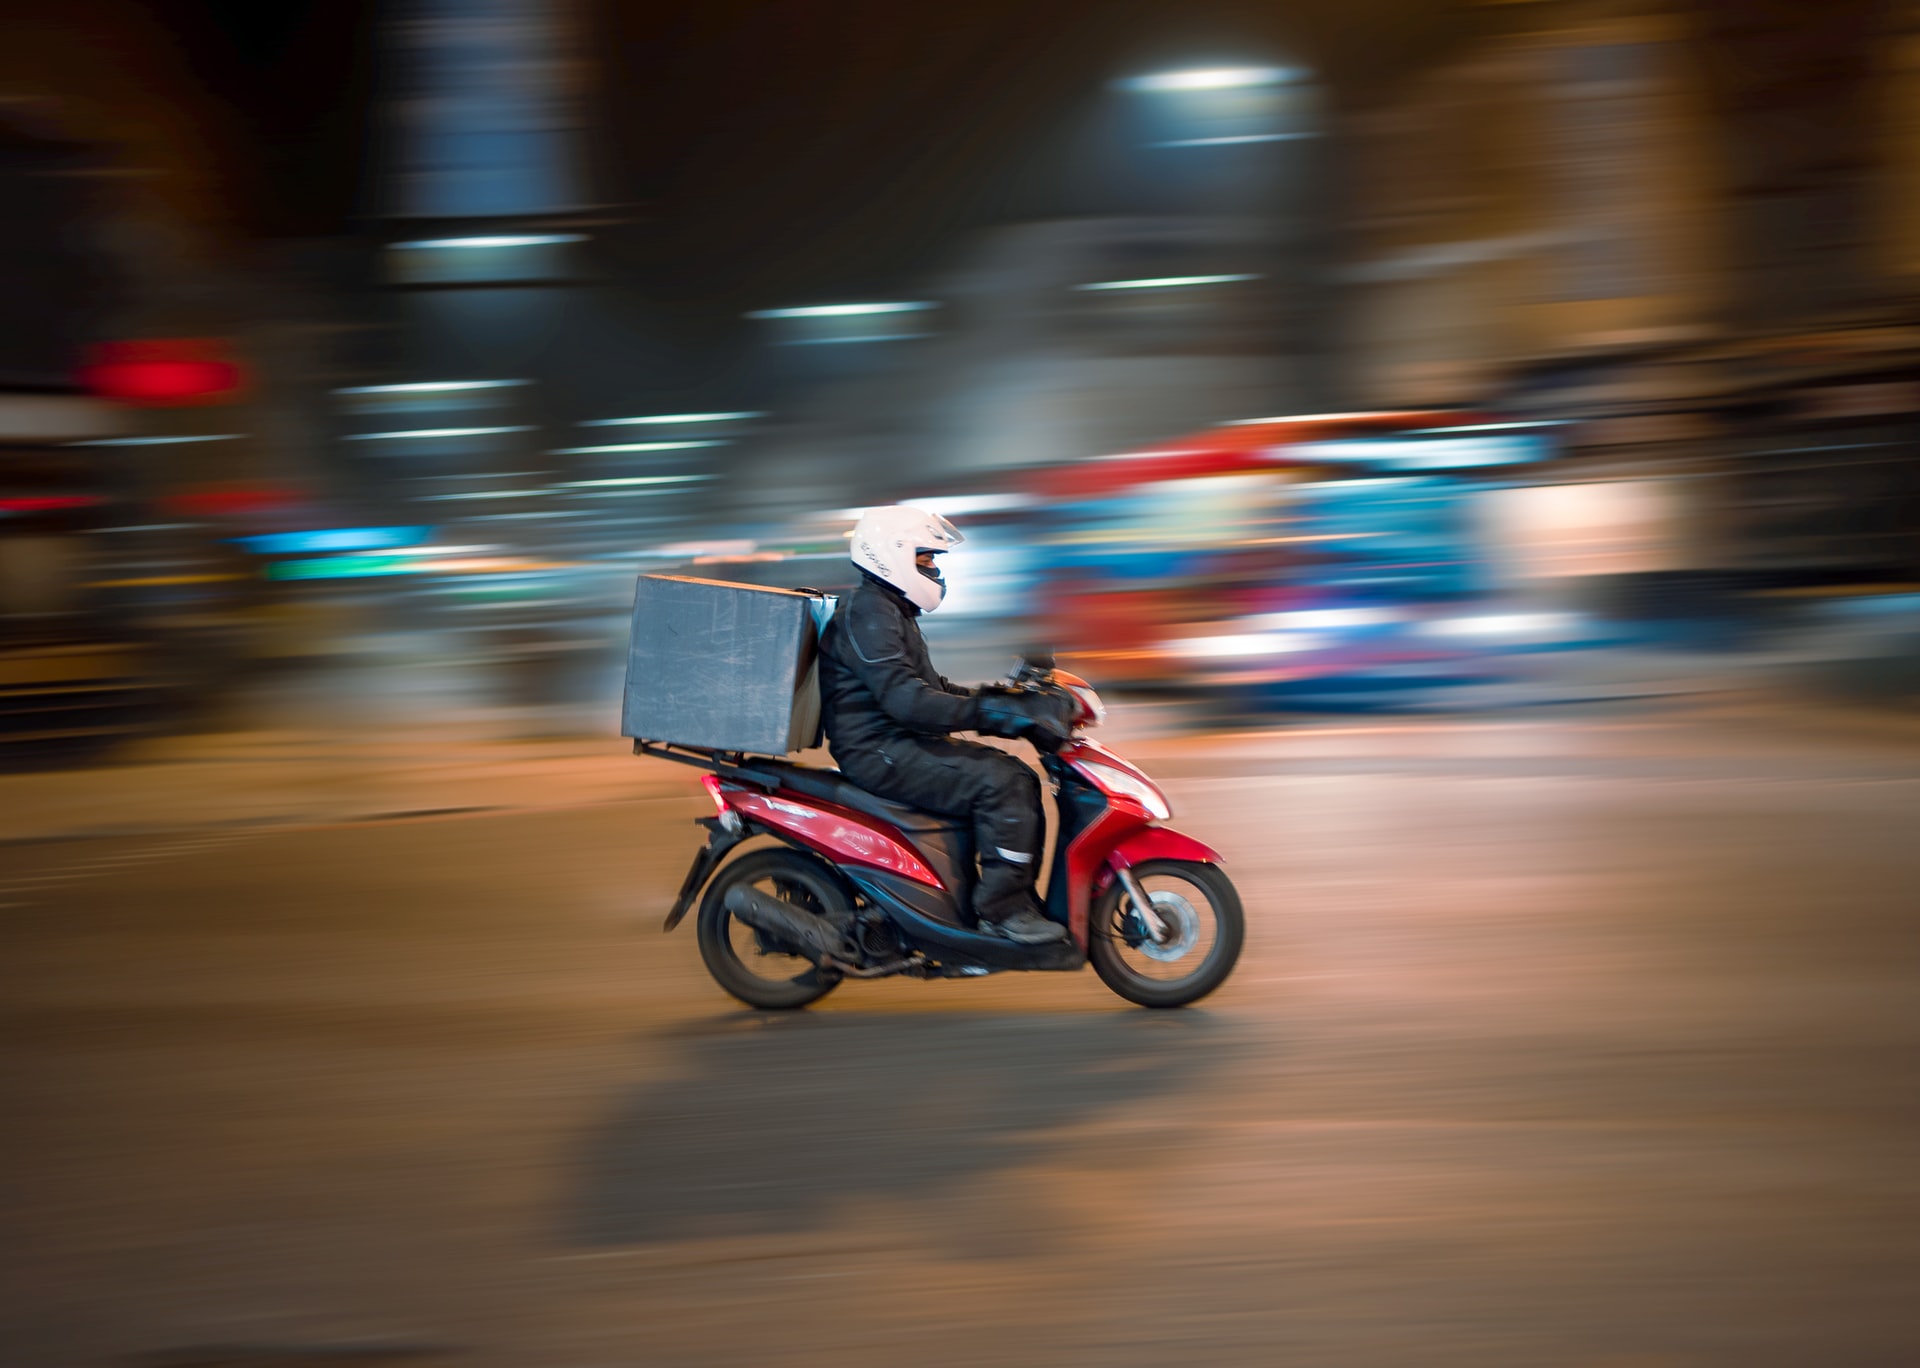 What App Do Delivery Drivers Use?